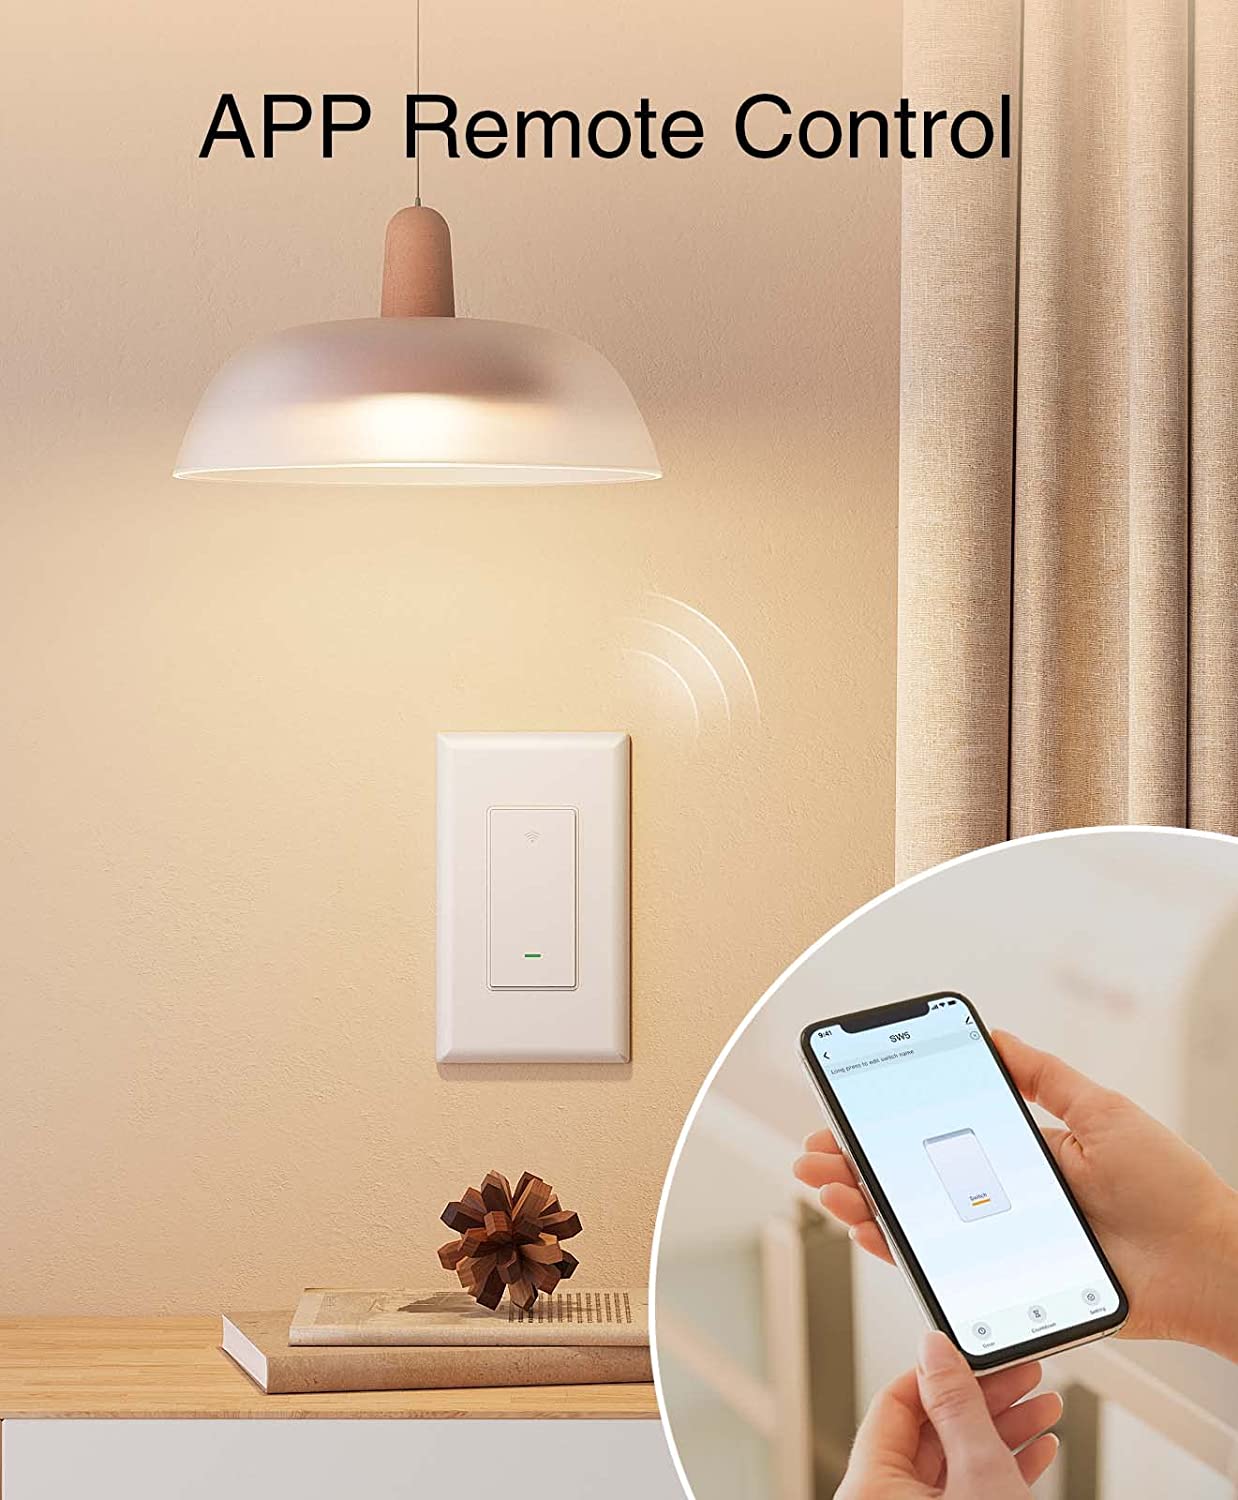 GHome Smart Switch, 2.4Ghz Wi-Fi Light Switch Compatible with Alexa, Google Home, Neutral Wire Required, Single-Pole,UL Certified,Voice Control and Timer, No Hub Required,1 Pack, White (SW5-1)